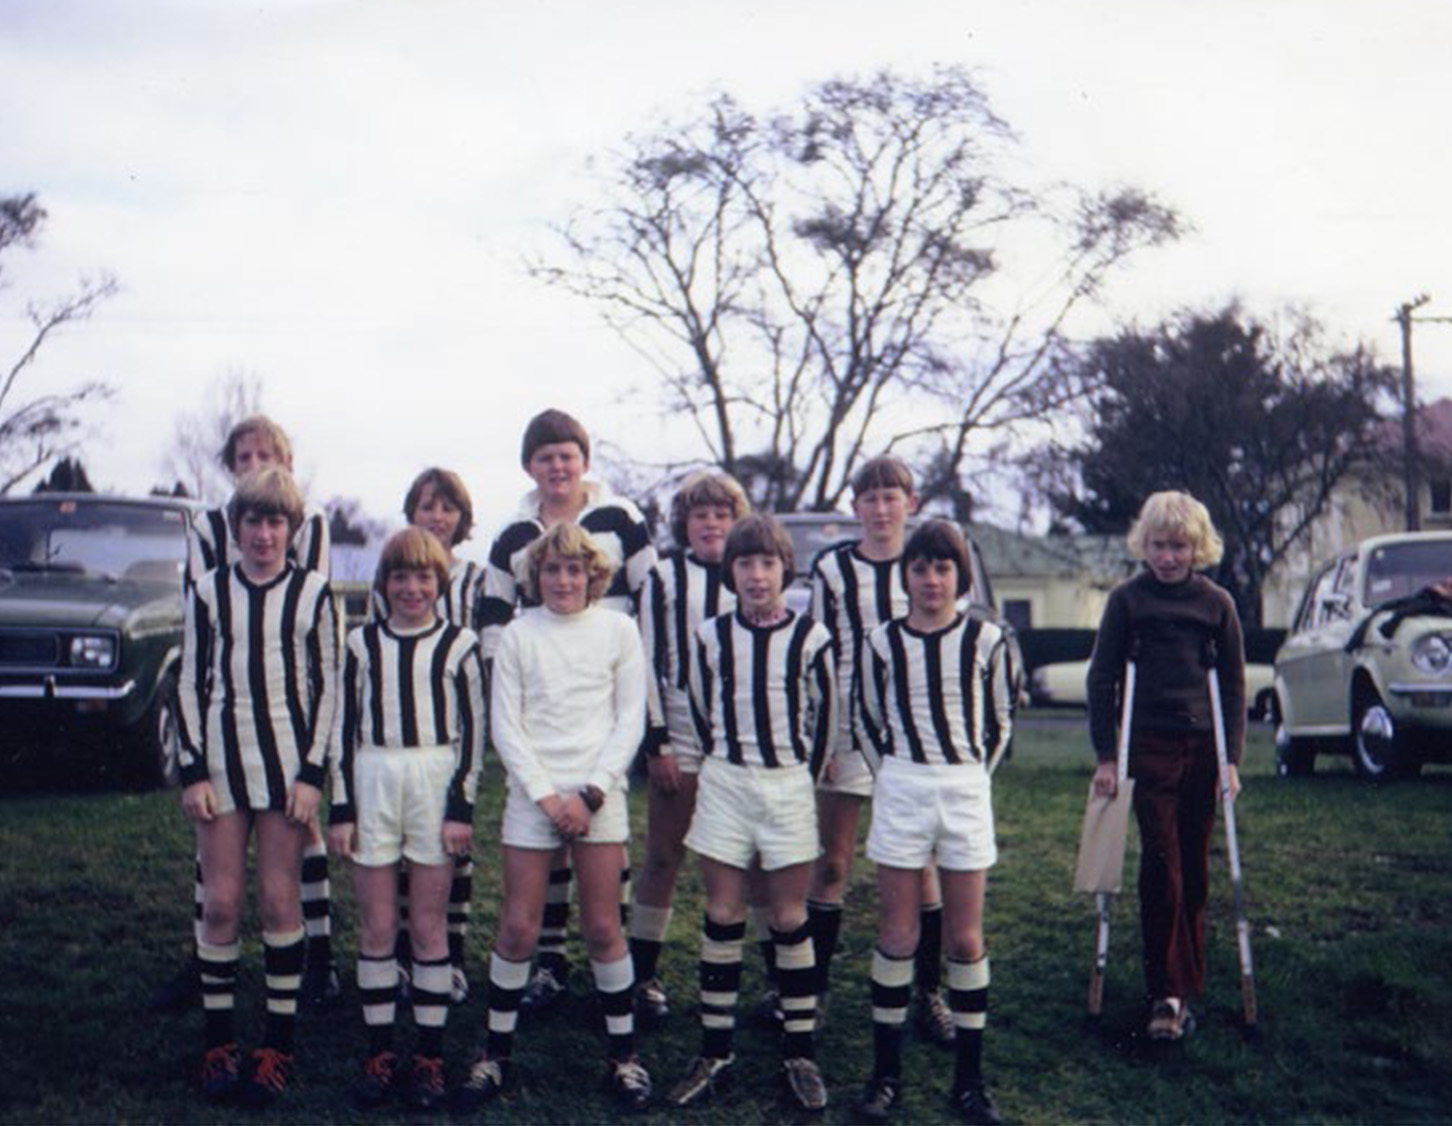 Tim Higham (on crutches) with Val Mekalick second from right, front row, and Piet de Jong back row second left.